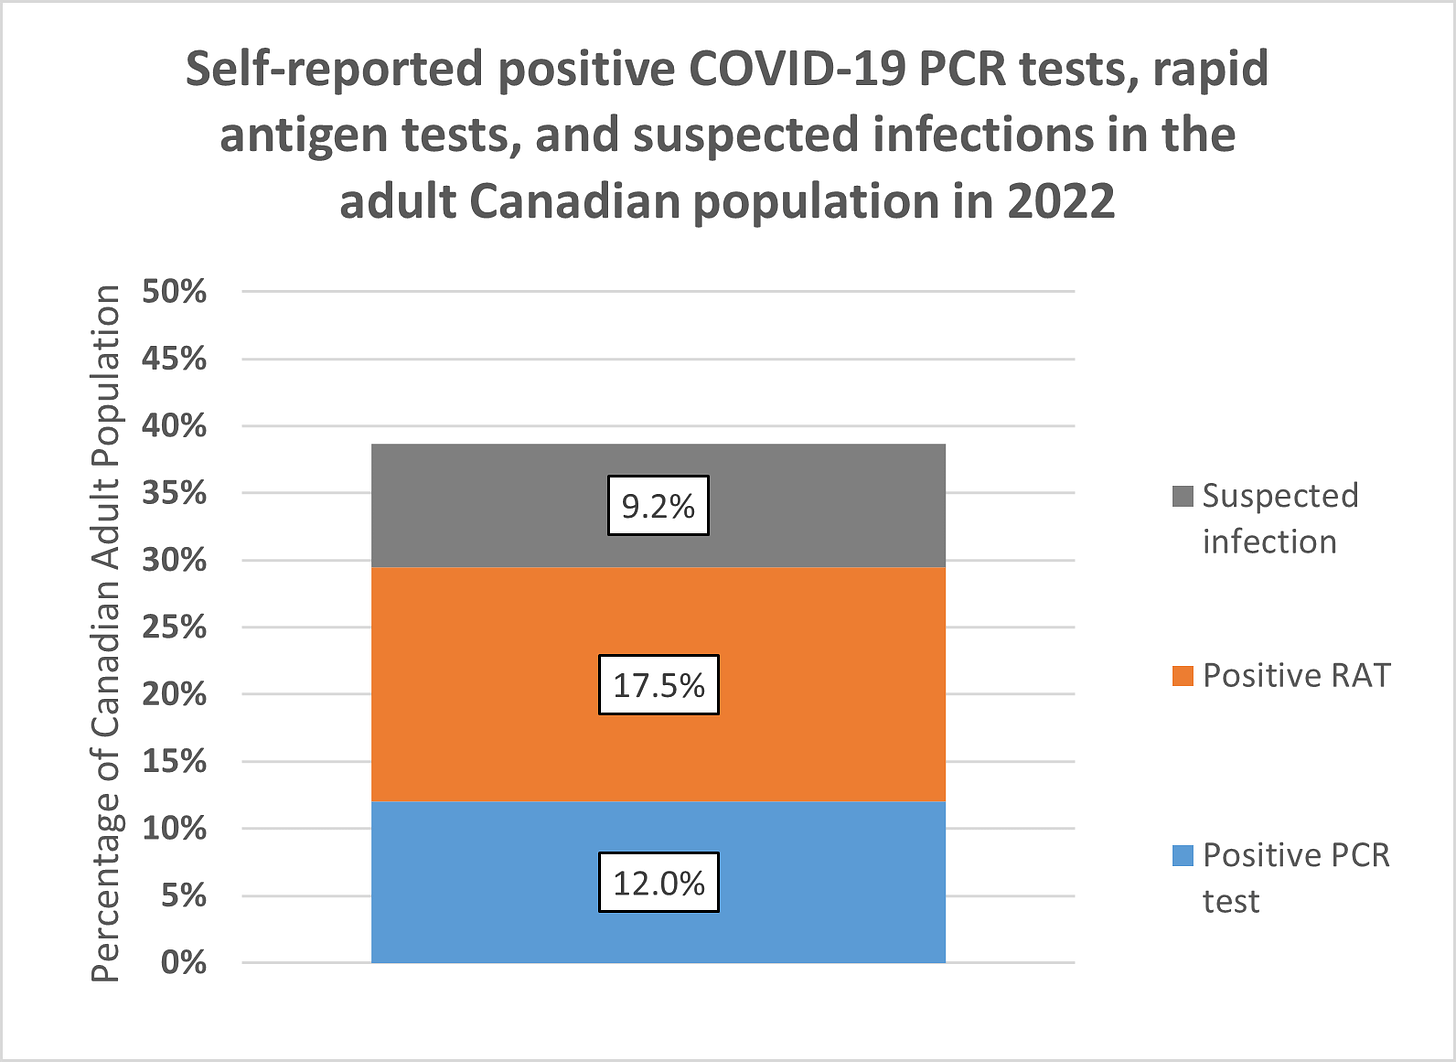 Stacked bar chart of self-reported positive COVID-19 tests and suspected infections among the Canadian adult population, broken into Positive PCR tests, positive Rapid Antigen Tests, and suspected infections, for Canadian adults of all sexes. The figures presented are detailed in the preceding paragraphs.